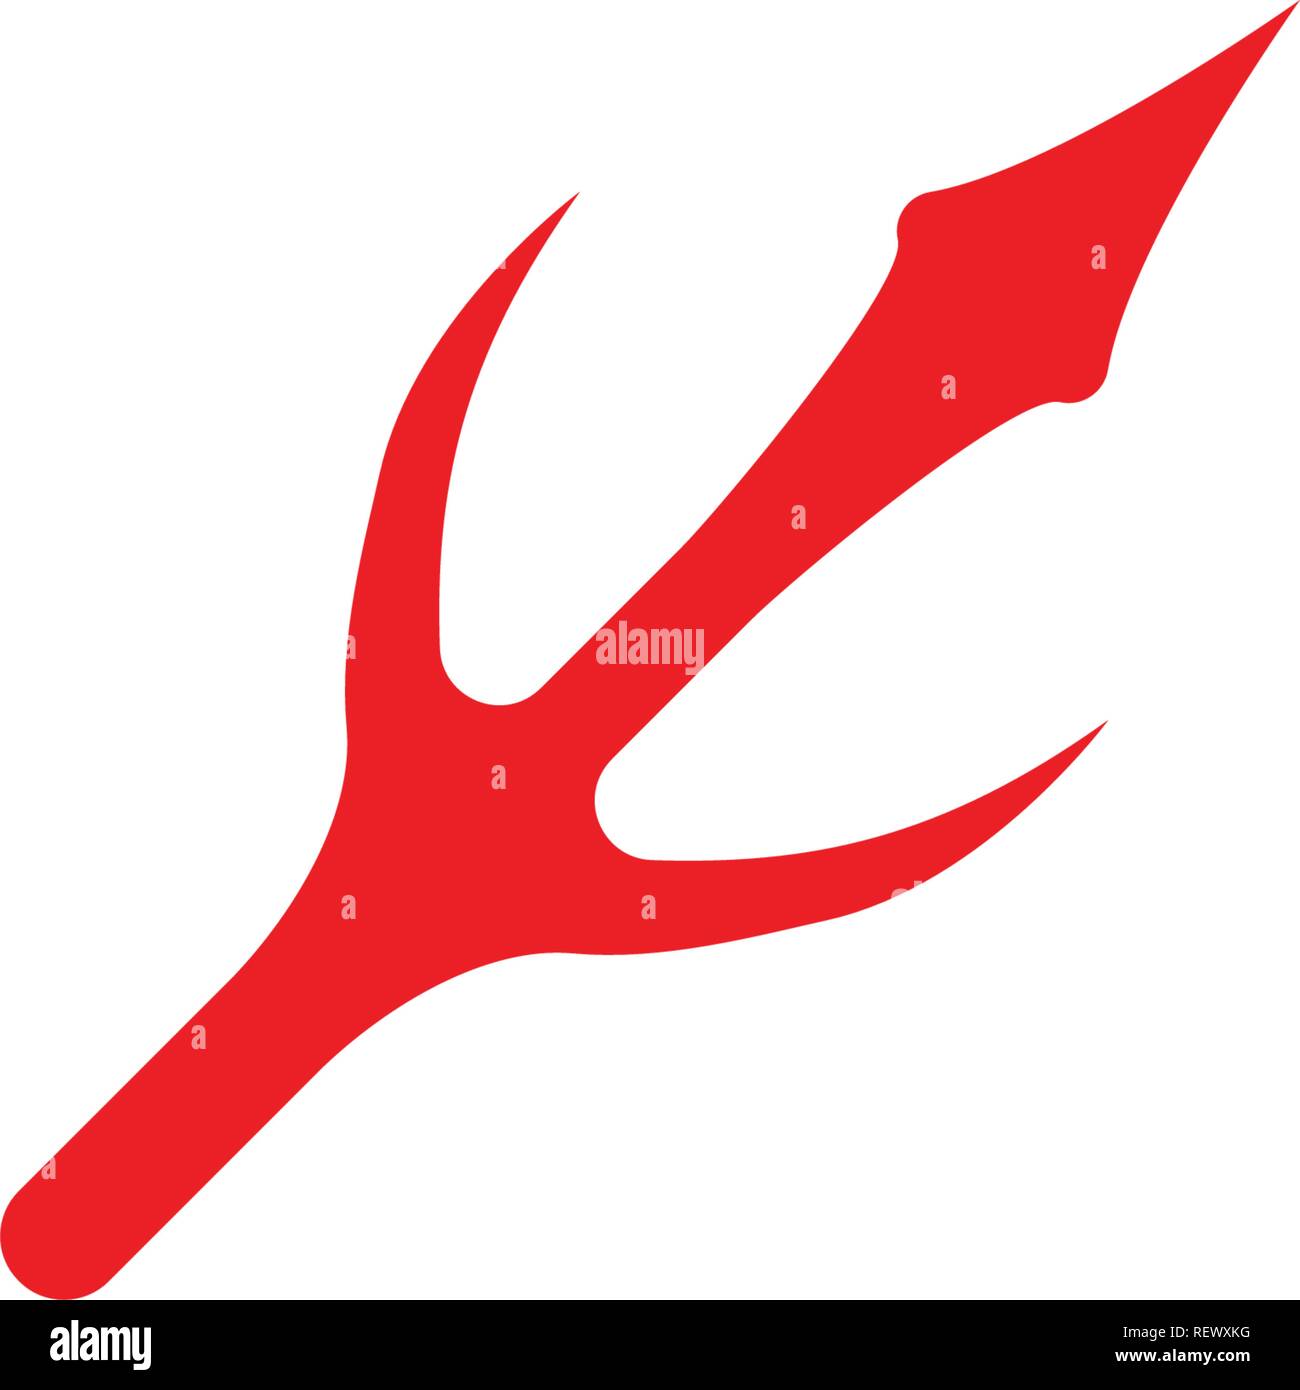 Burning Devils Trident Fork Abstract Fire Stock Photo, Picture and Royalty  Free Image. Image 64018483.